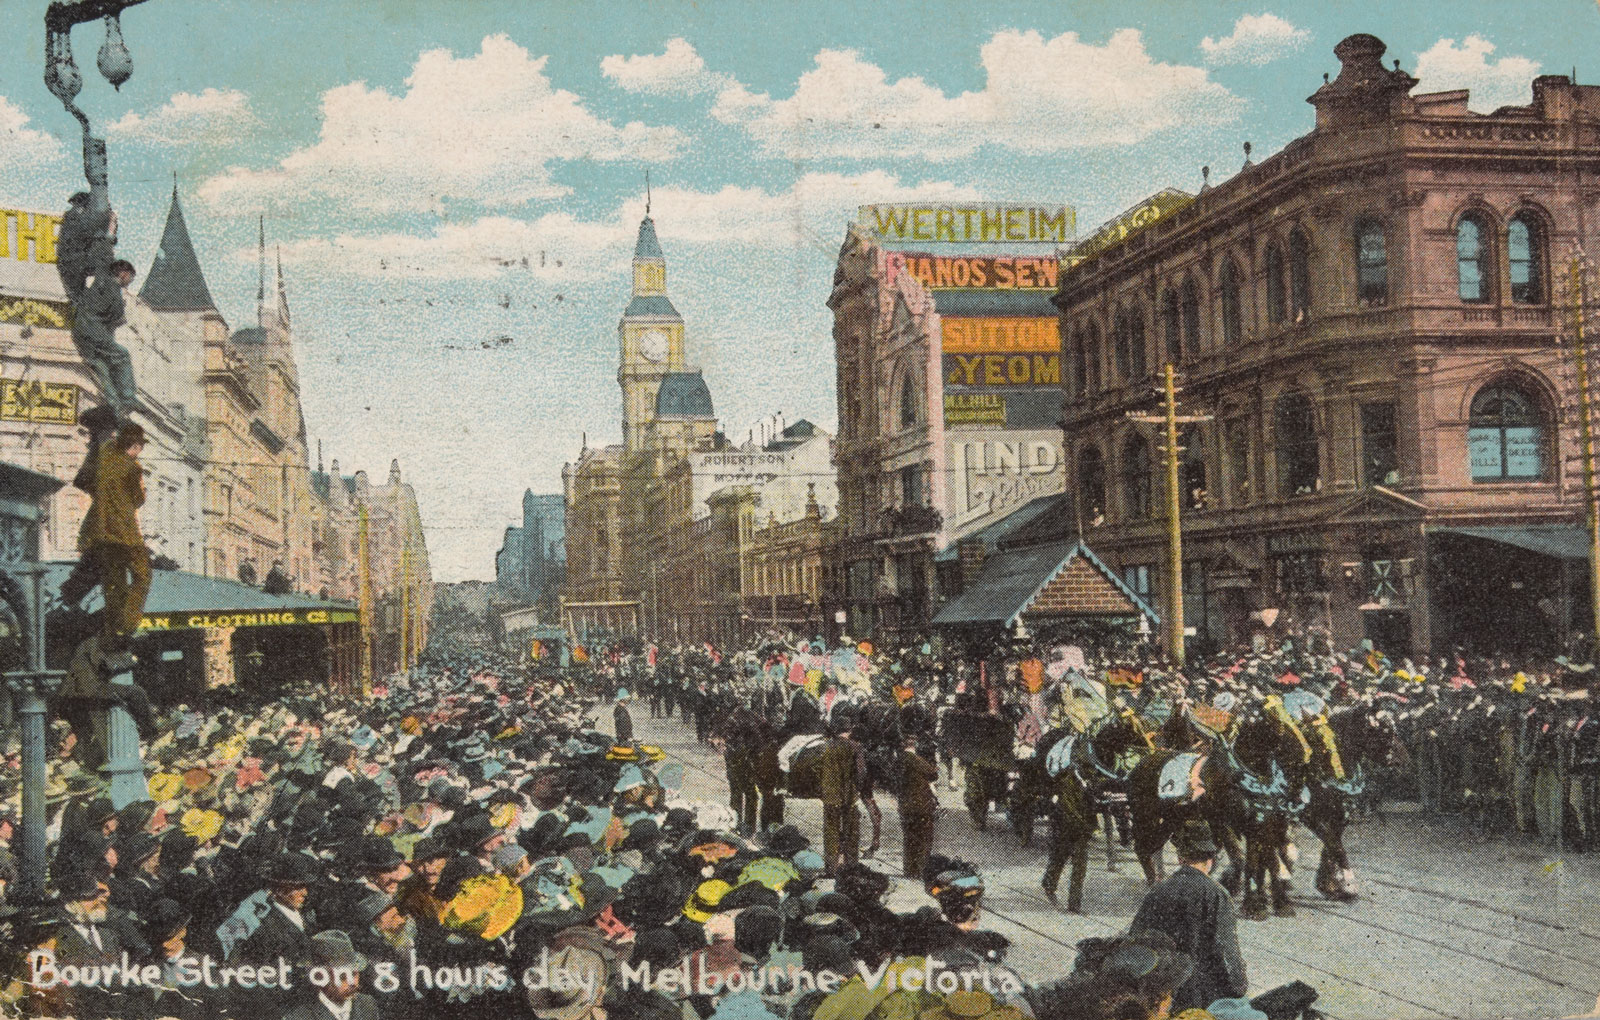 <p>An eight-hour day parade in Bourke Street, Melbourne, 1907</p>
